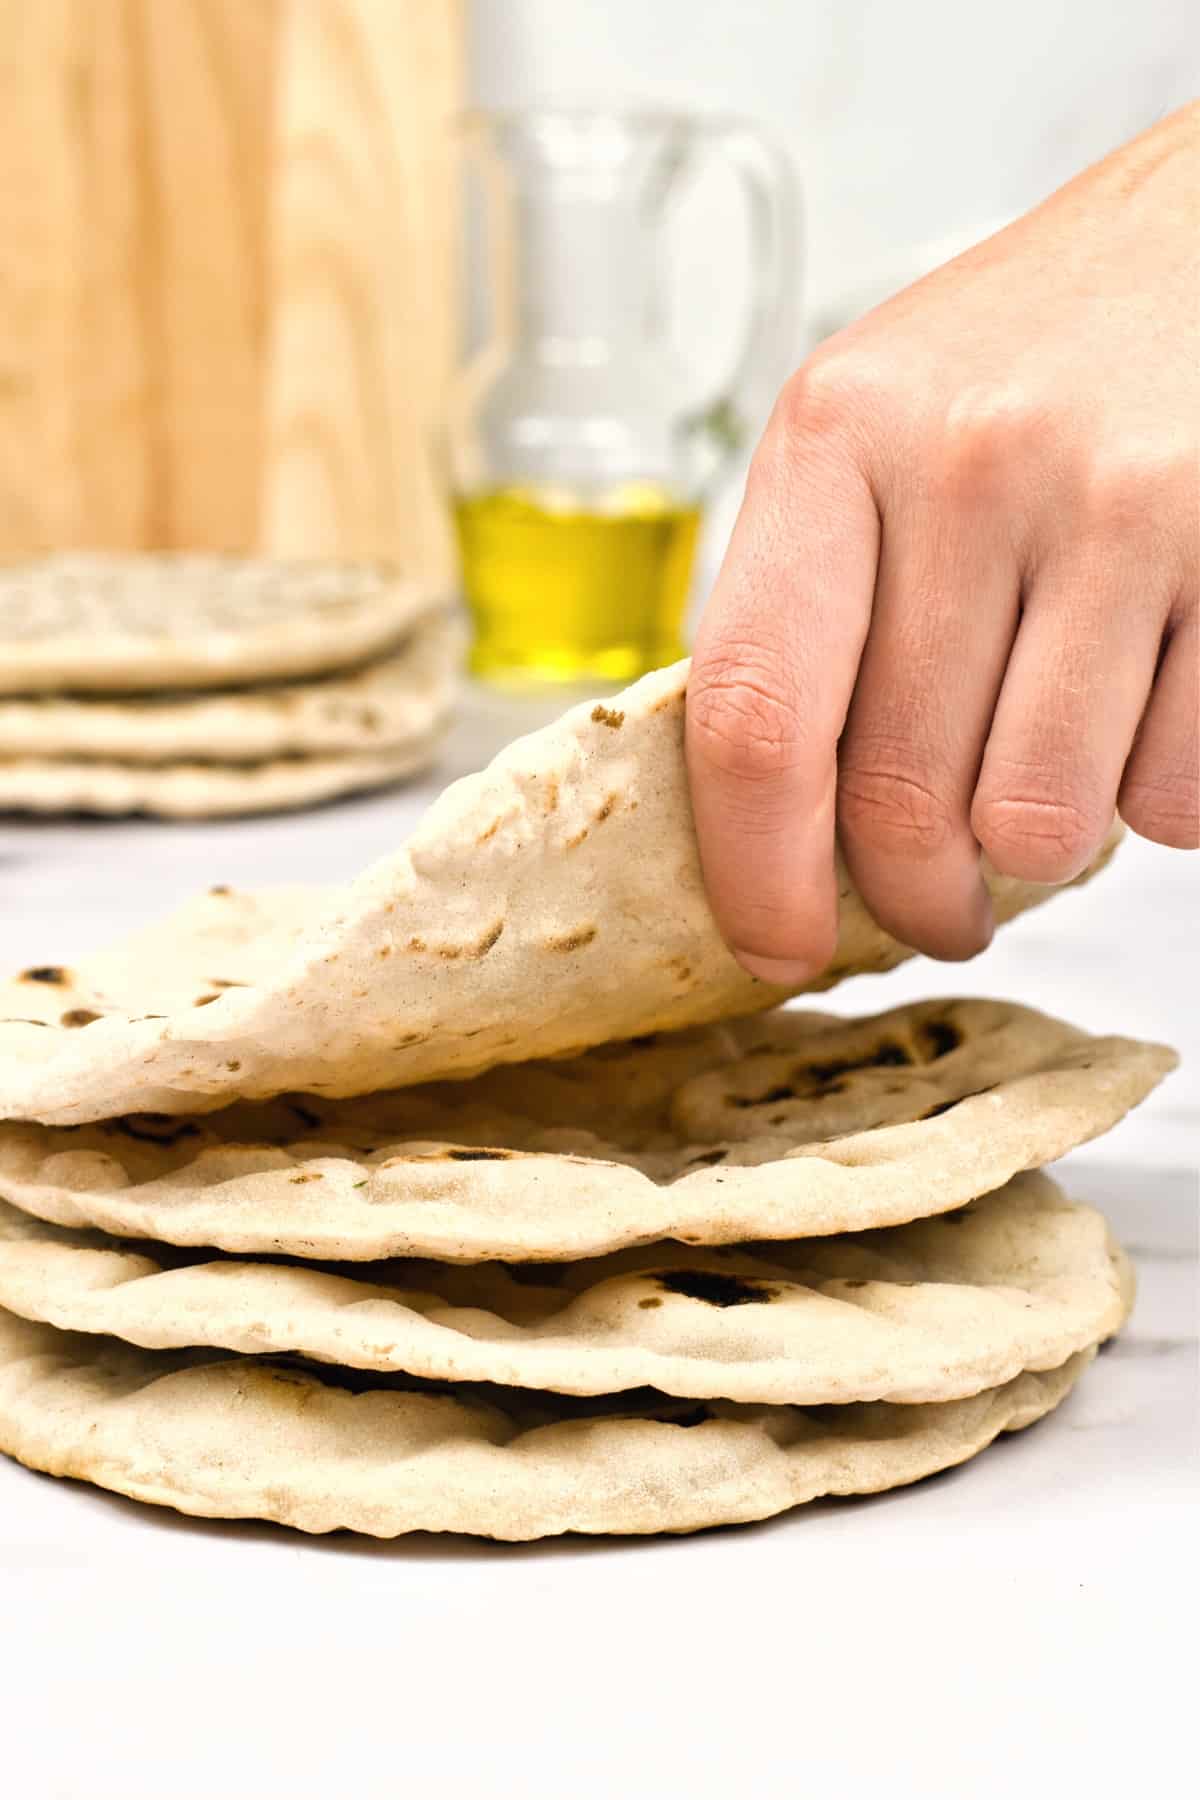 Hand holding up a pita bread from a stack of pitas.